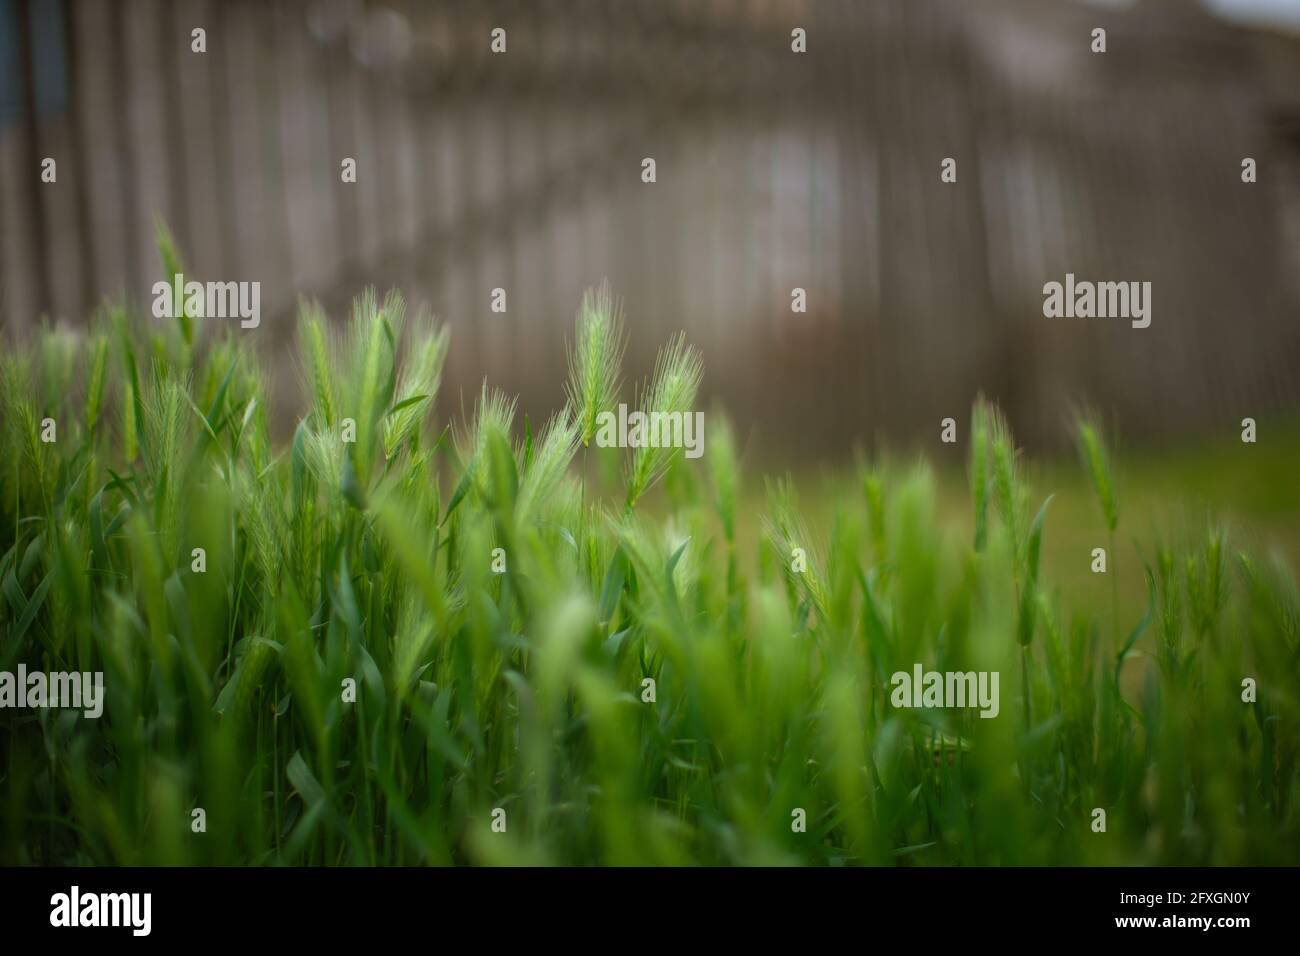 Fresh green barley grass growing in a rural garden on the background of a picket fence. Stock Photo